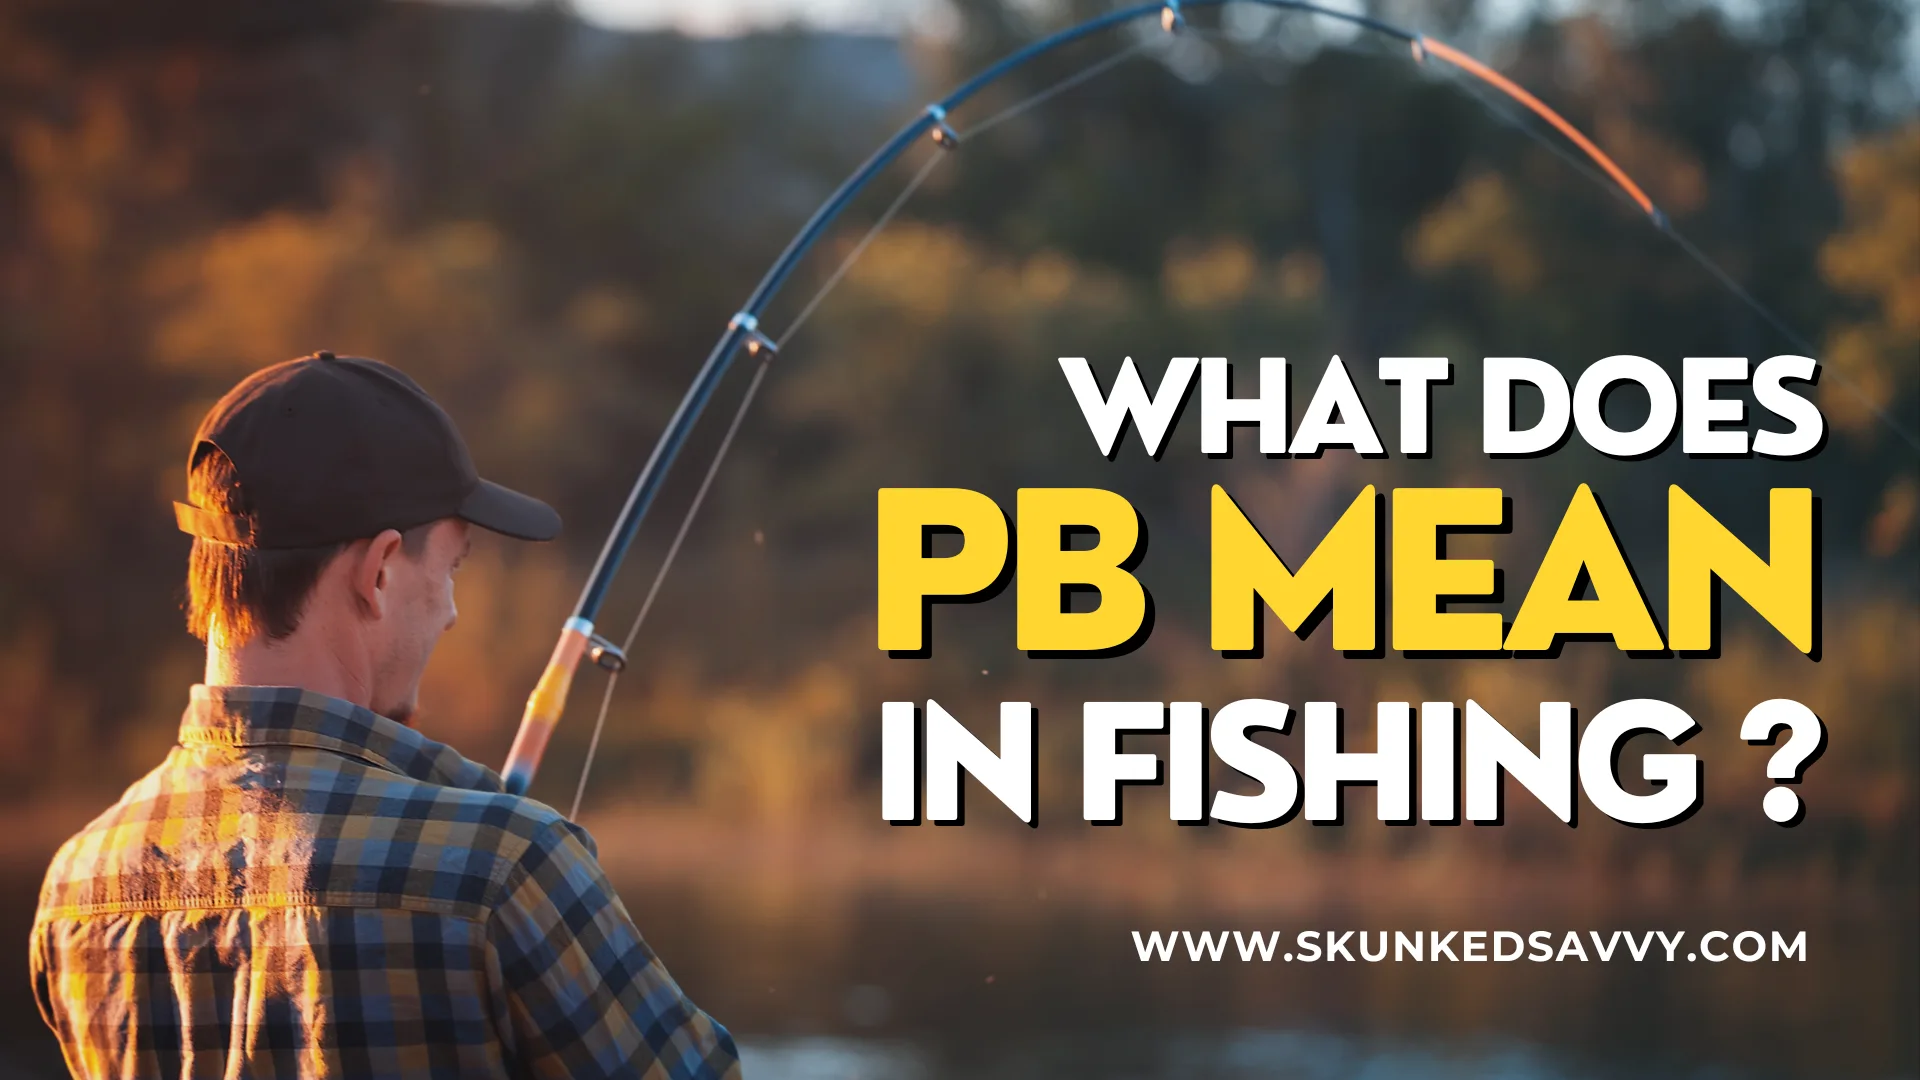 What Does PB Mean in Fishing